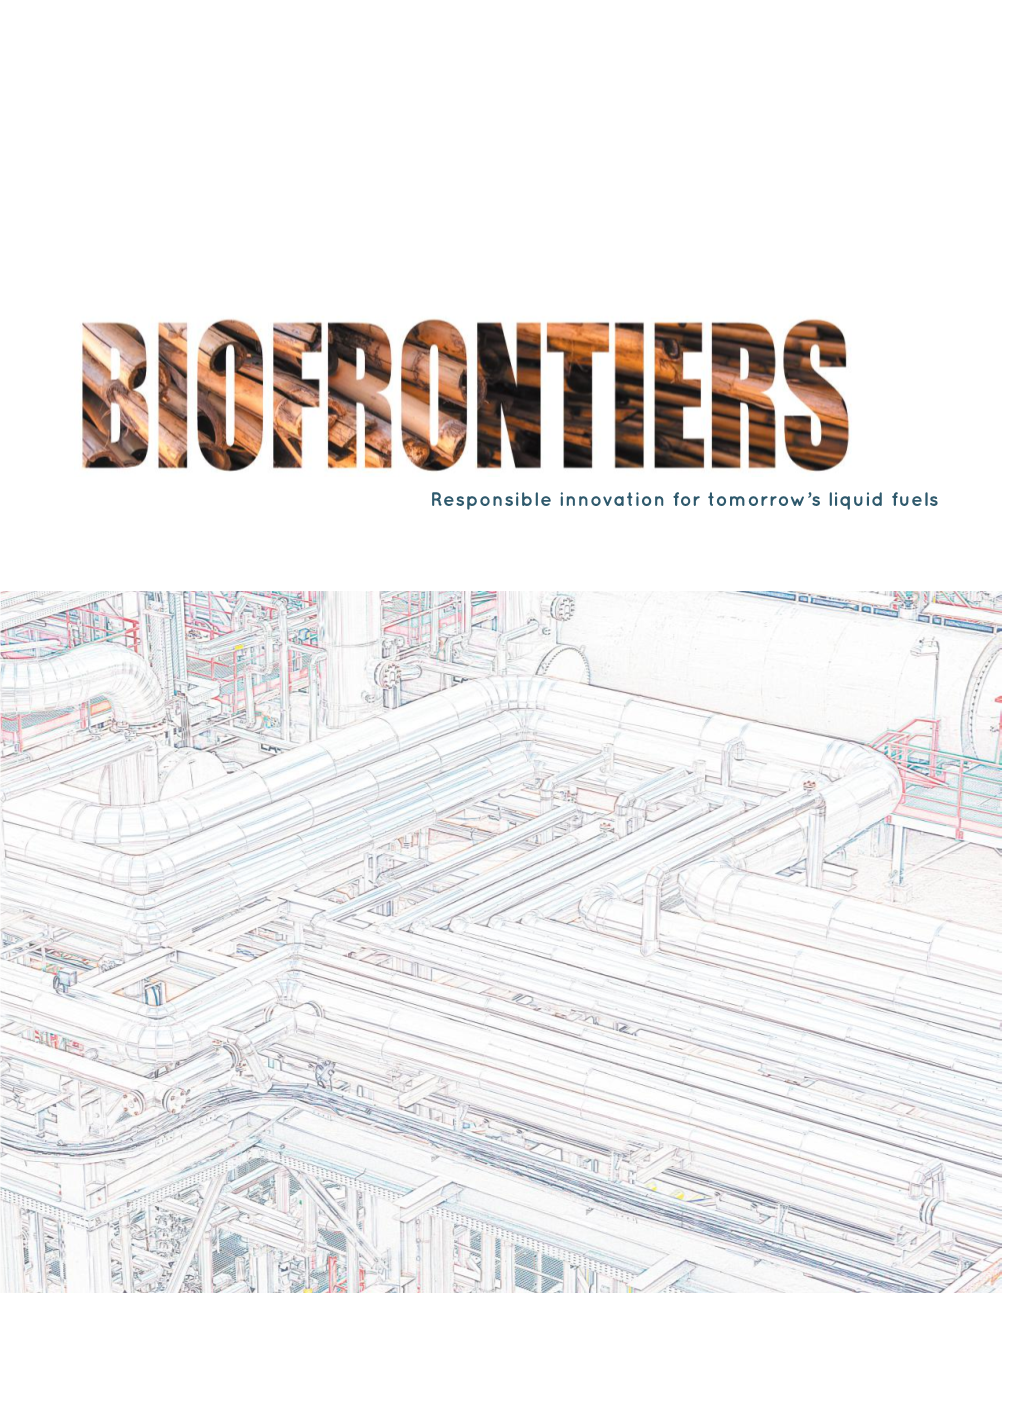 Biofrontiers - Responsible Innovation for Chris Malins & Stephanie Searle, Tomorrow’S Liquid Fuels